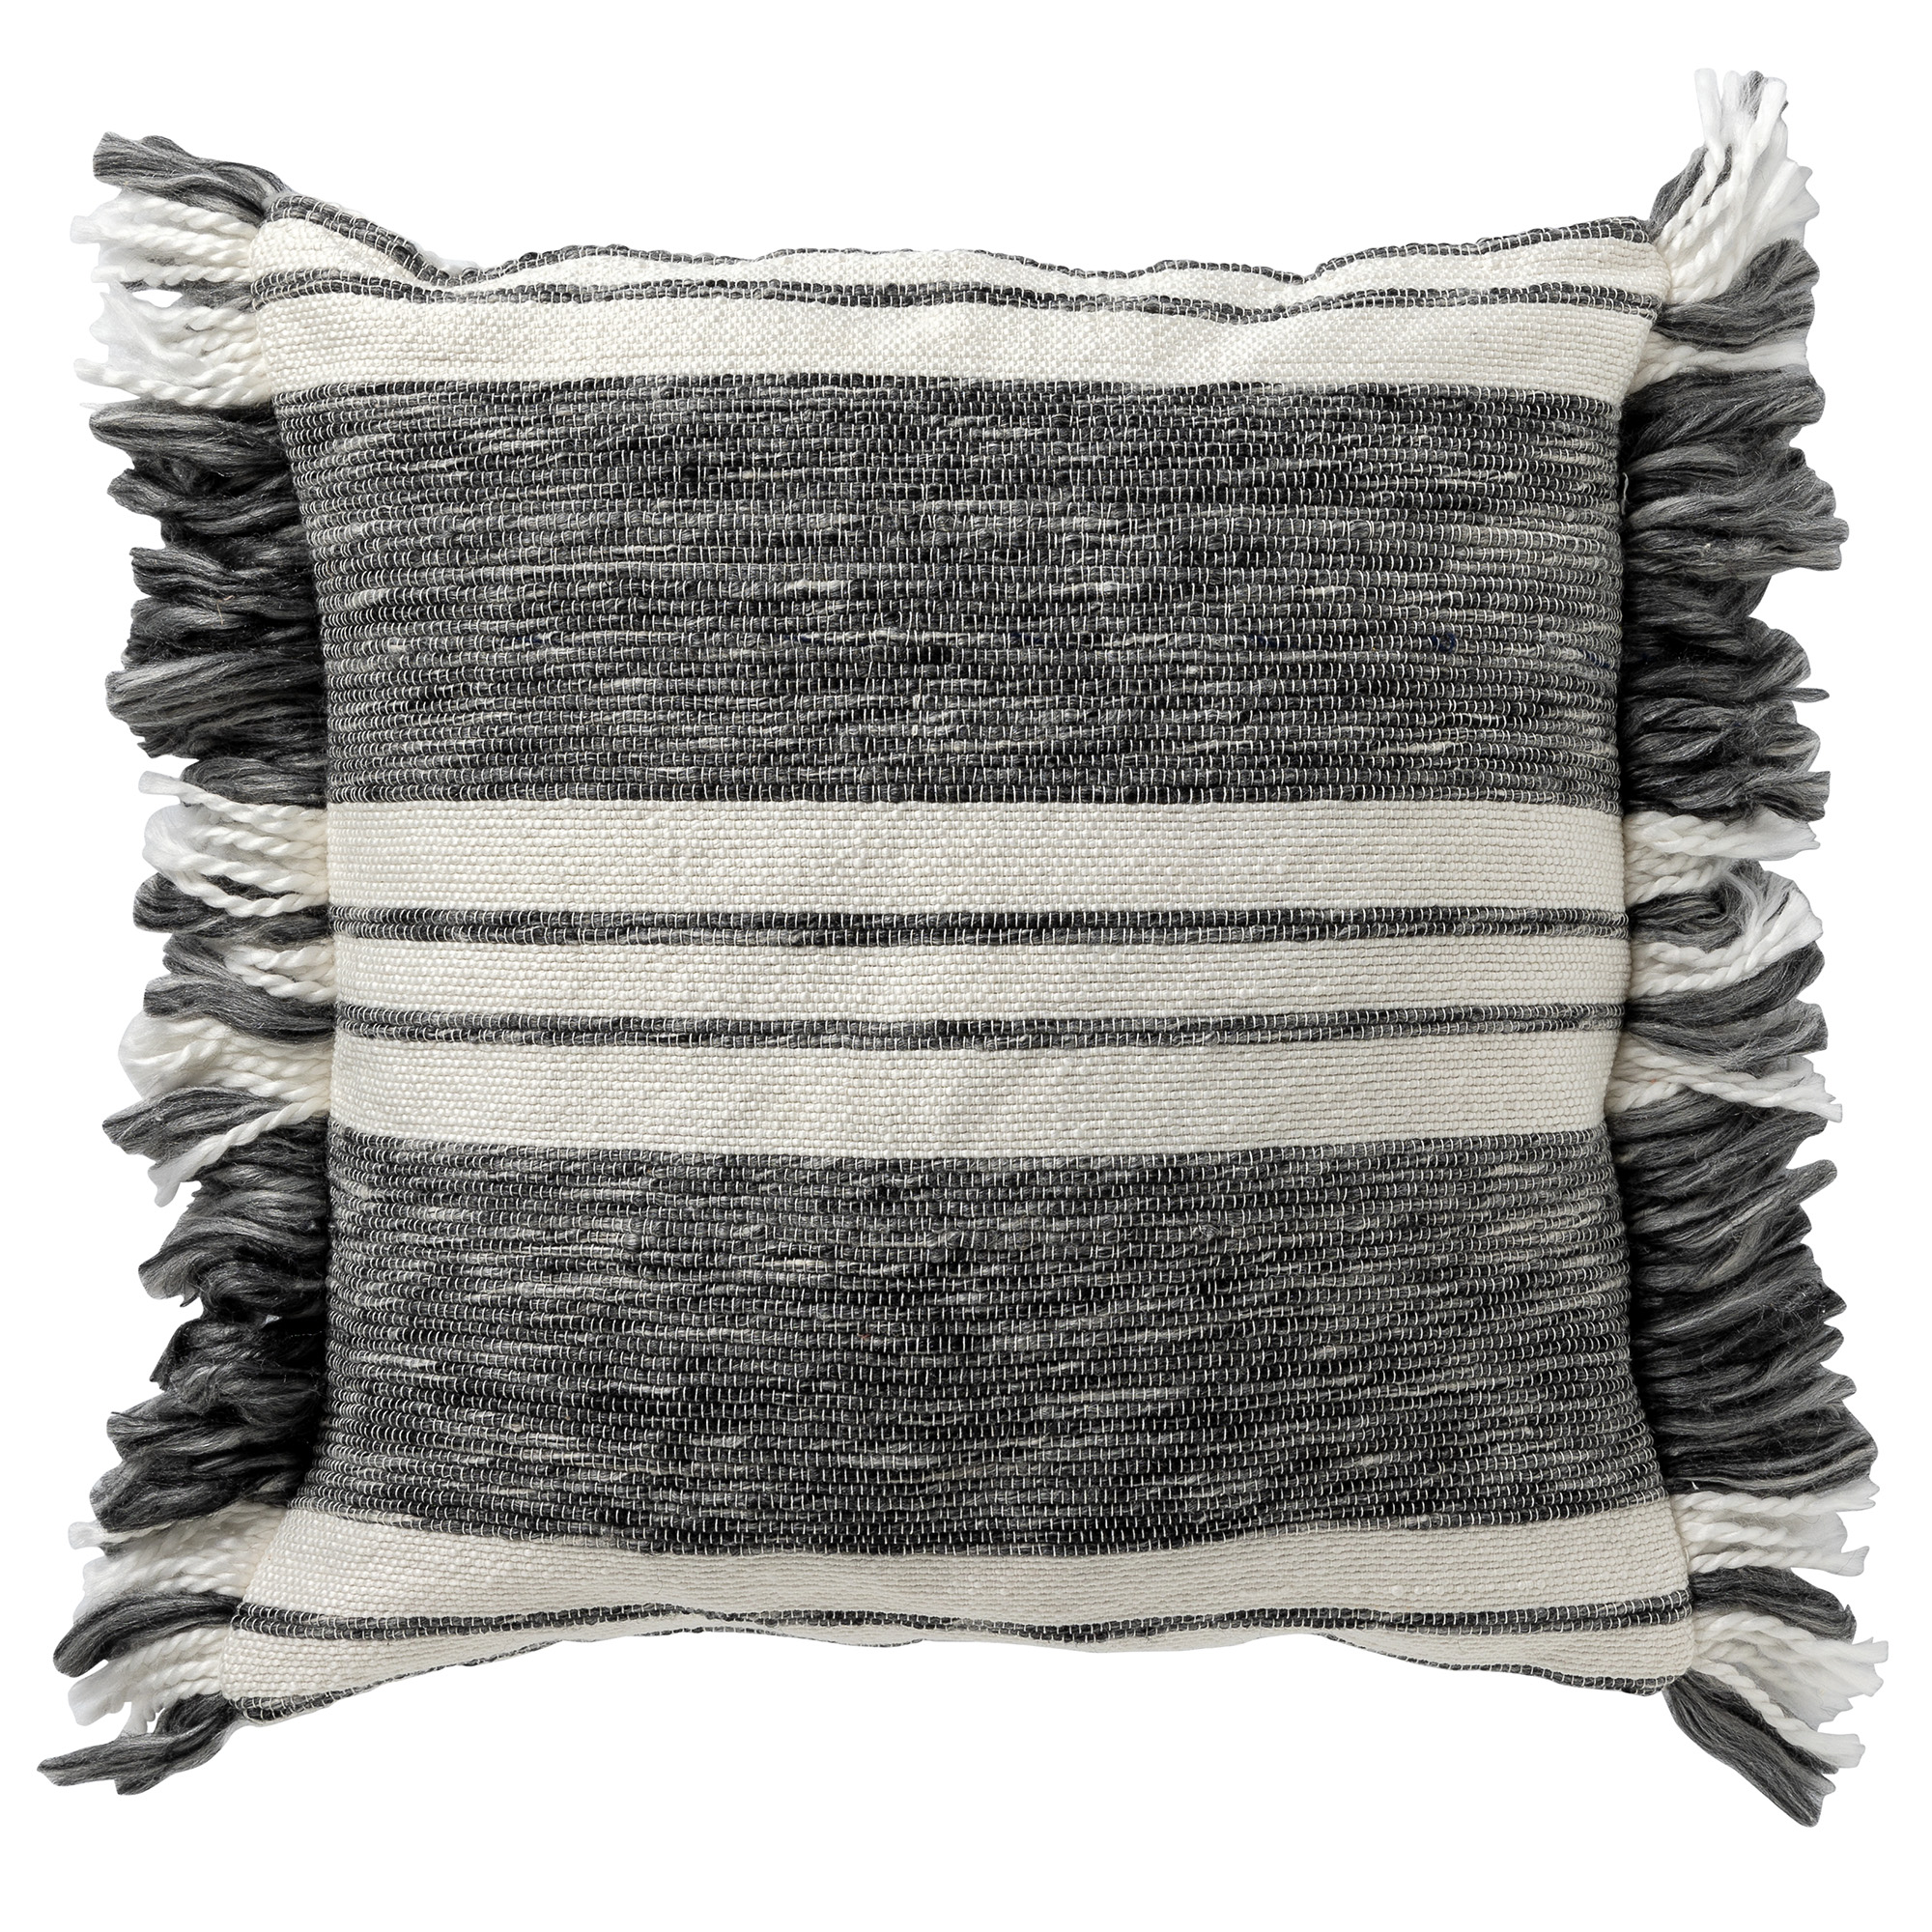 EDGAR - Cushion 45x45 cm with cushion cover made of 85% recycled polyester - Eco Line collection - Charcoal Gray - anthracite